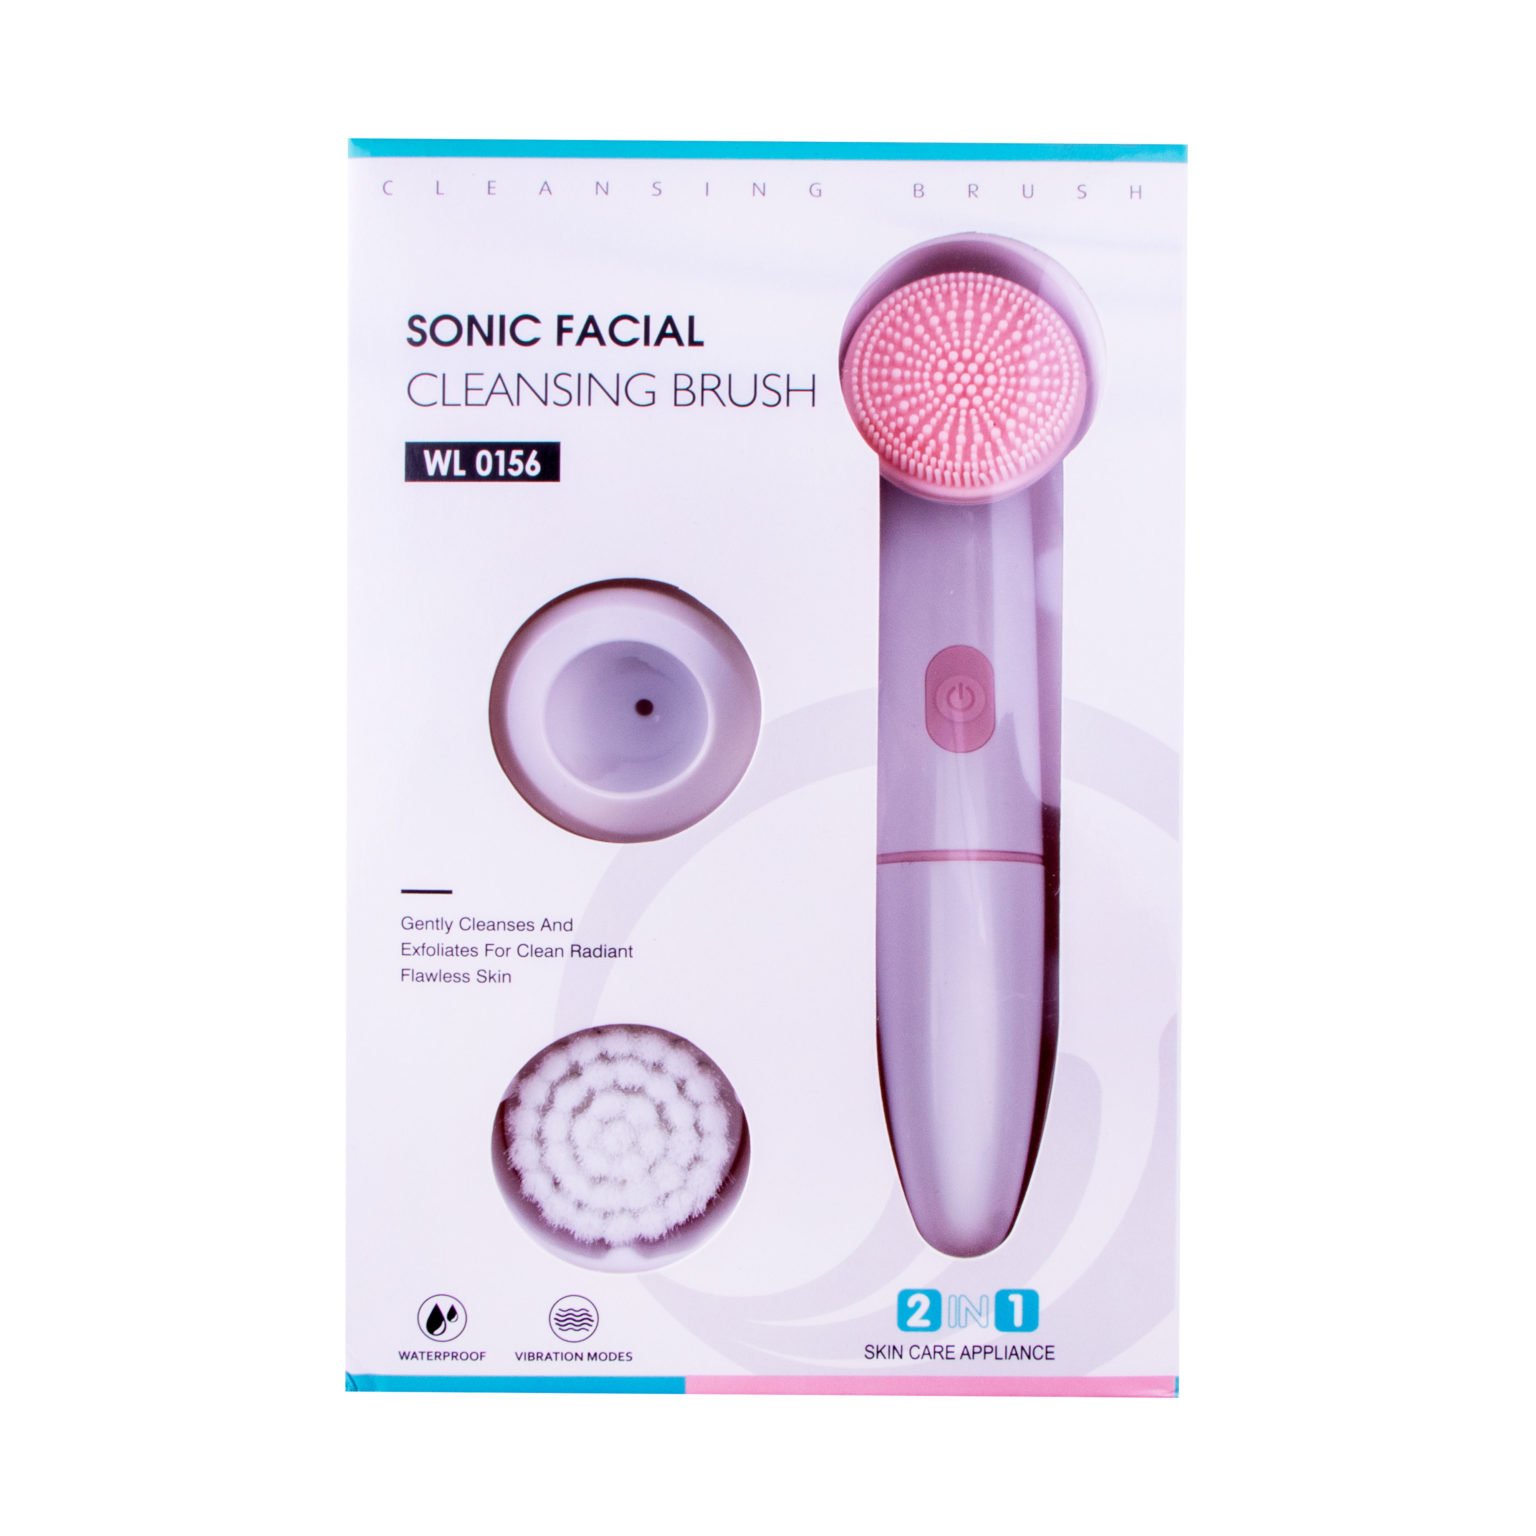 Sonic Facial Cleansing Brush Value Co South Africa